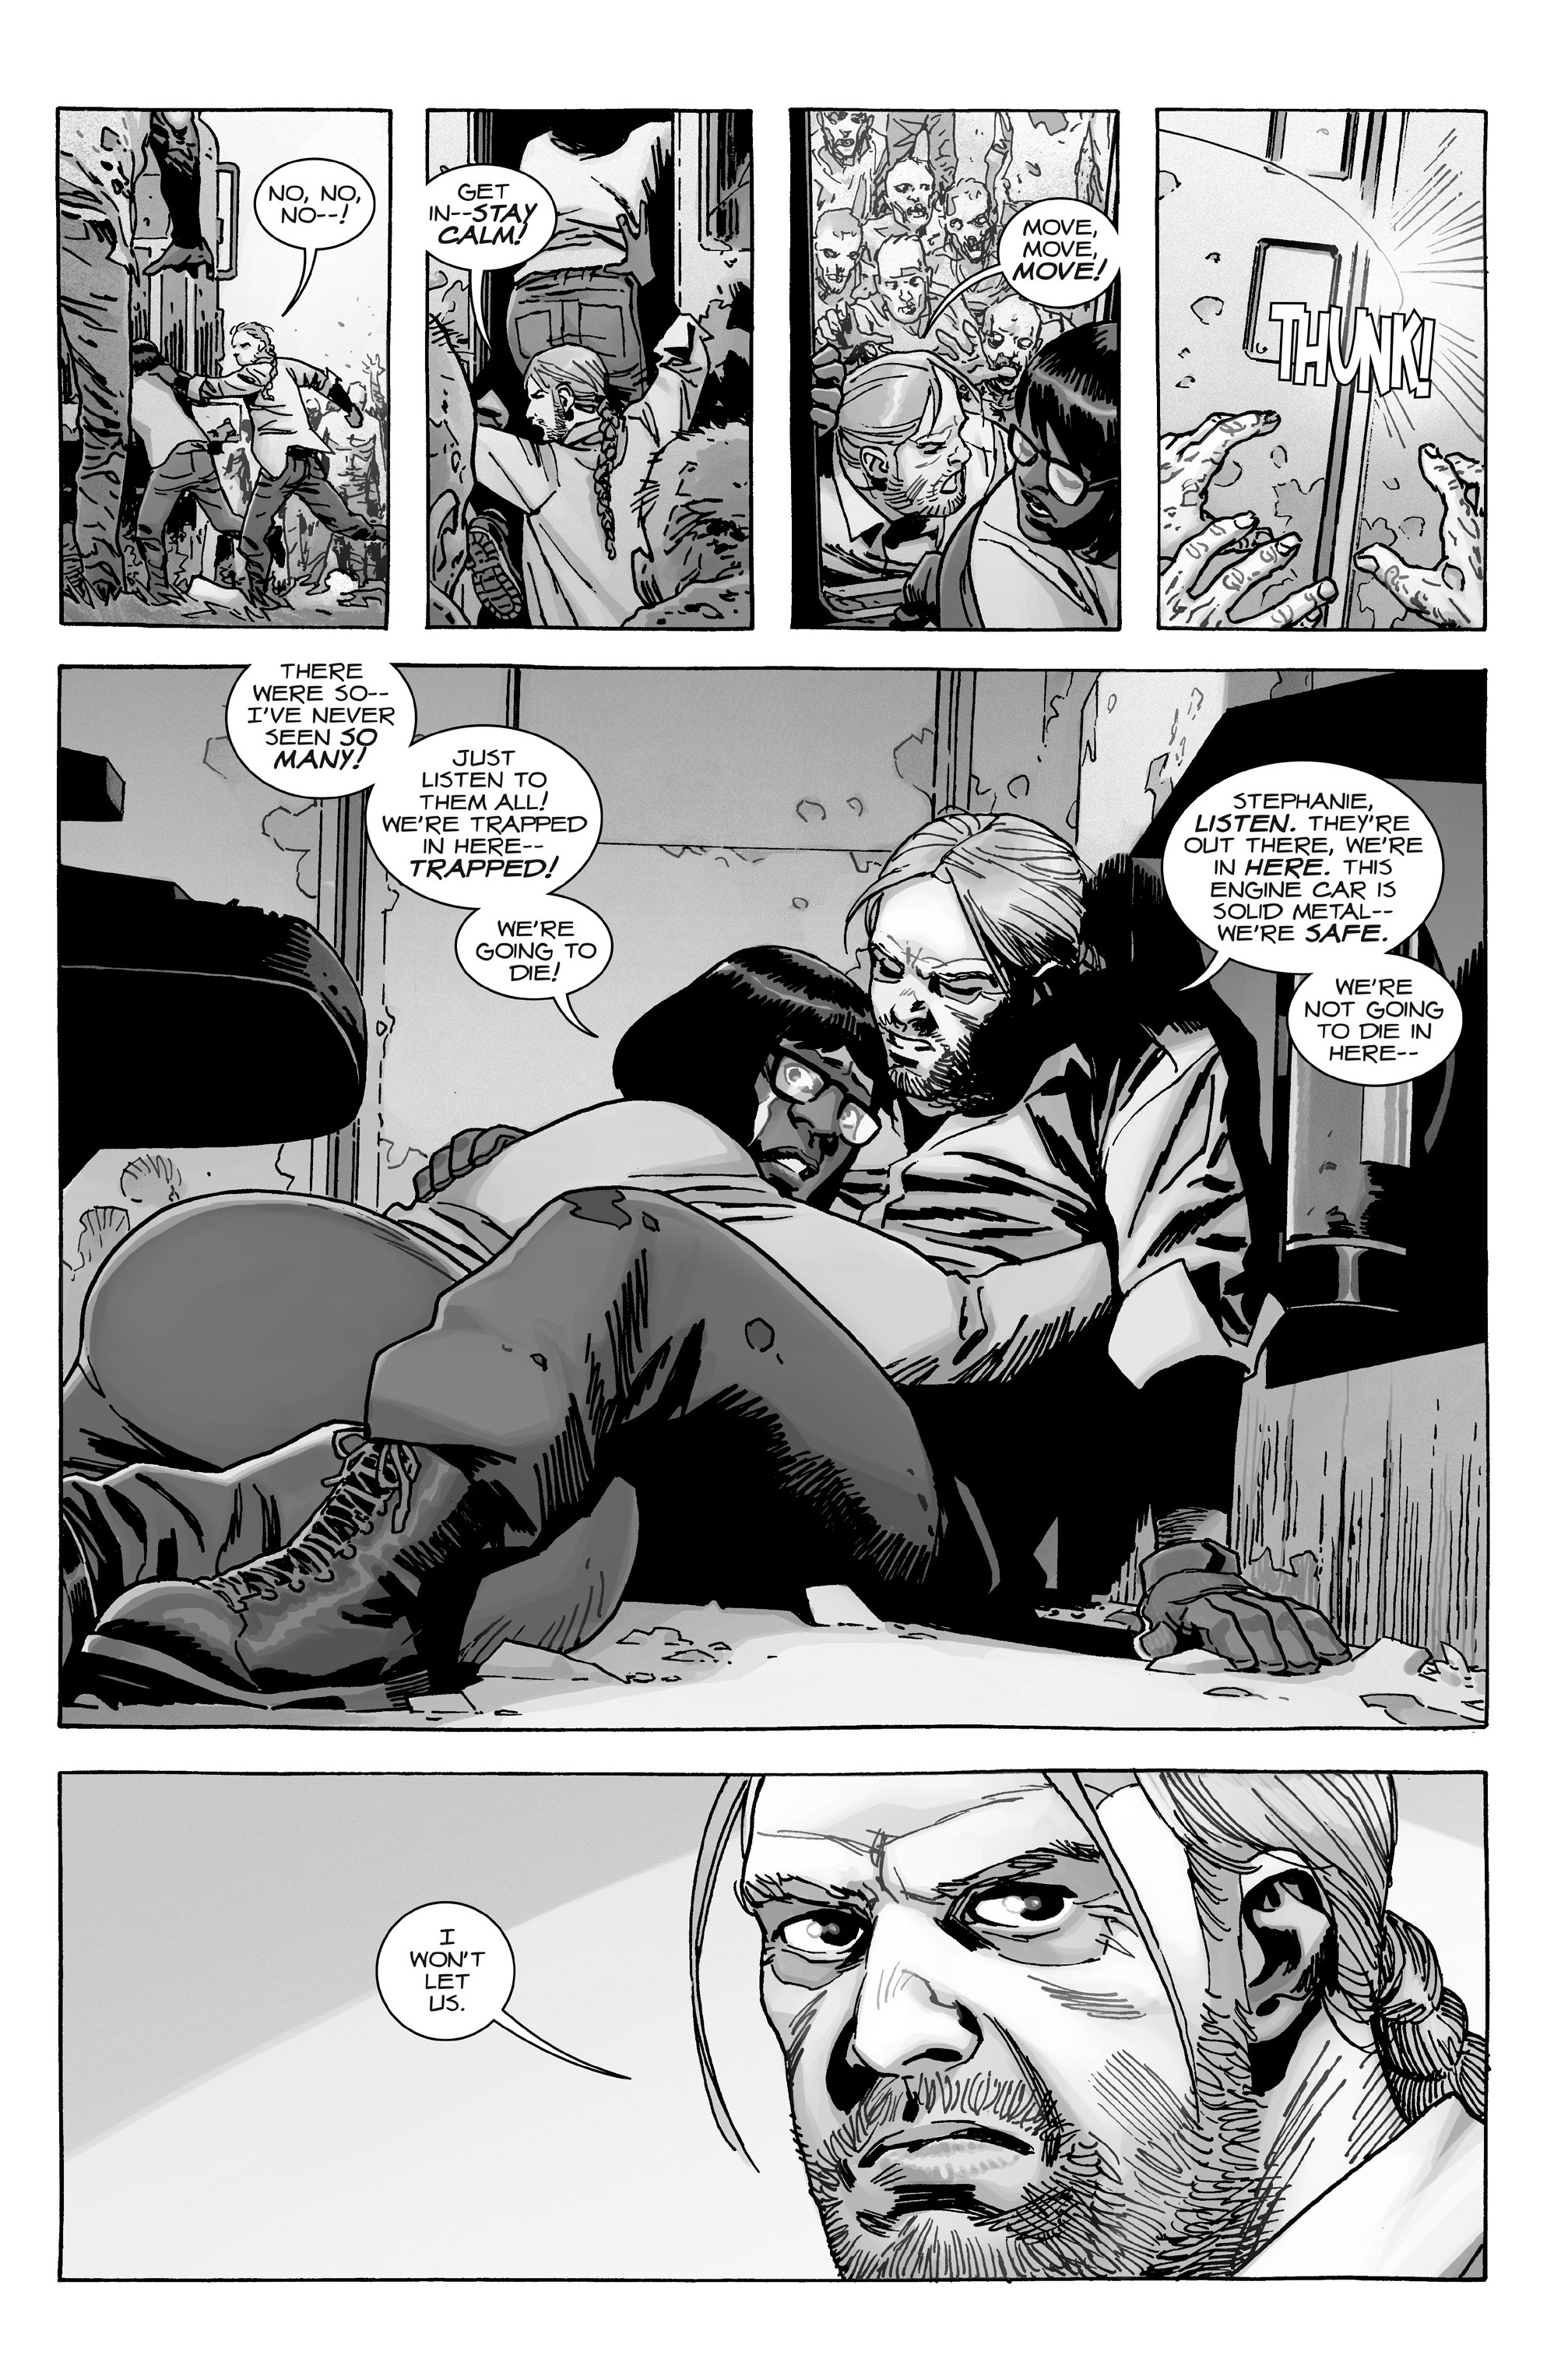 The Walking Dead (2003-): Chapter 189 - Page 4